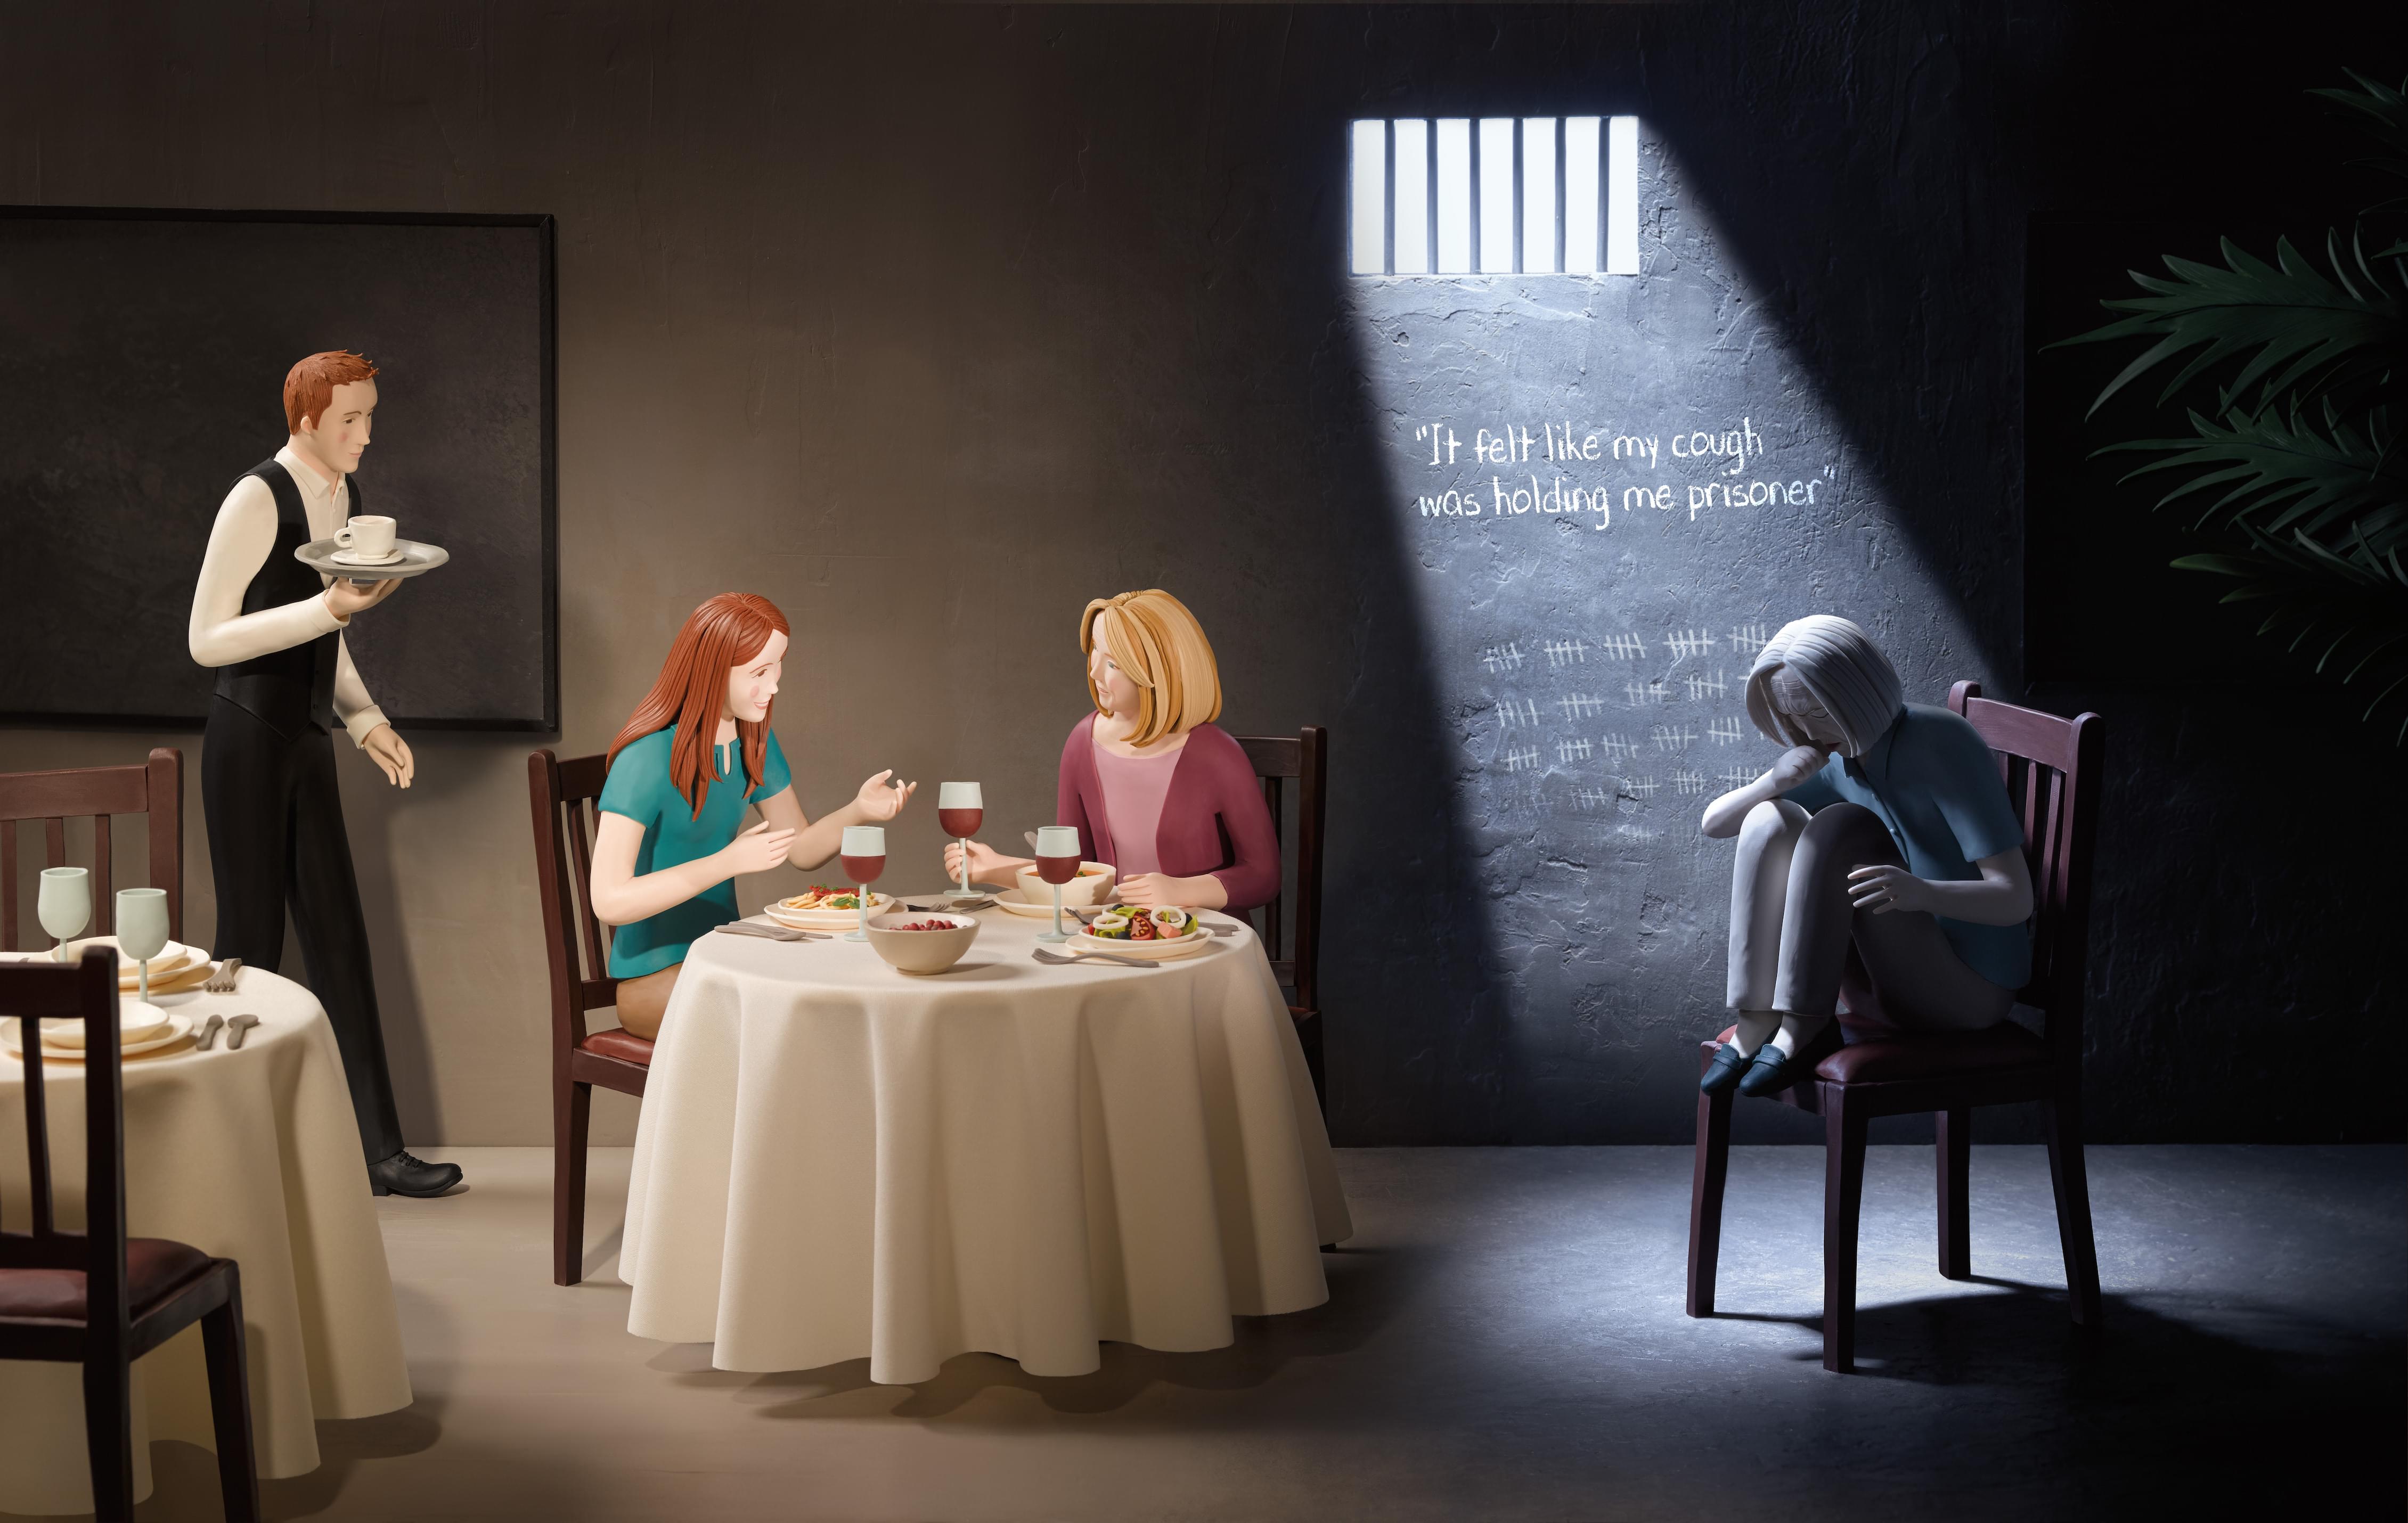 An illustration shows a patient in a restaurant. Her companions sit at a table, while she sits slightly separated from them. The background behind her changes from a restaurant to a jail cell. Light shines through a barred window onto her as she coughs. A quotation says: 'I felt like my cough was holding me prisoner.'